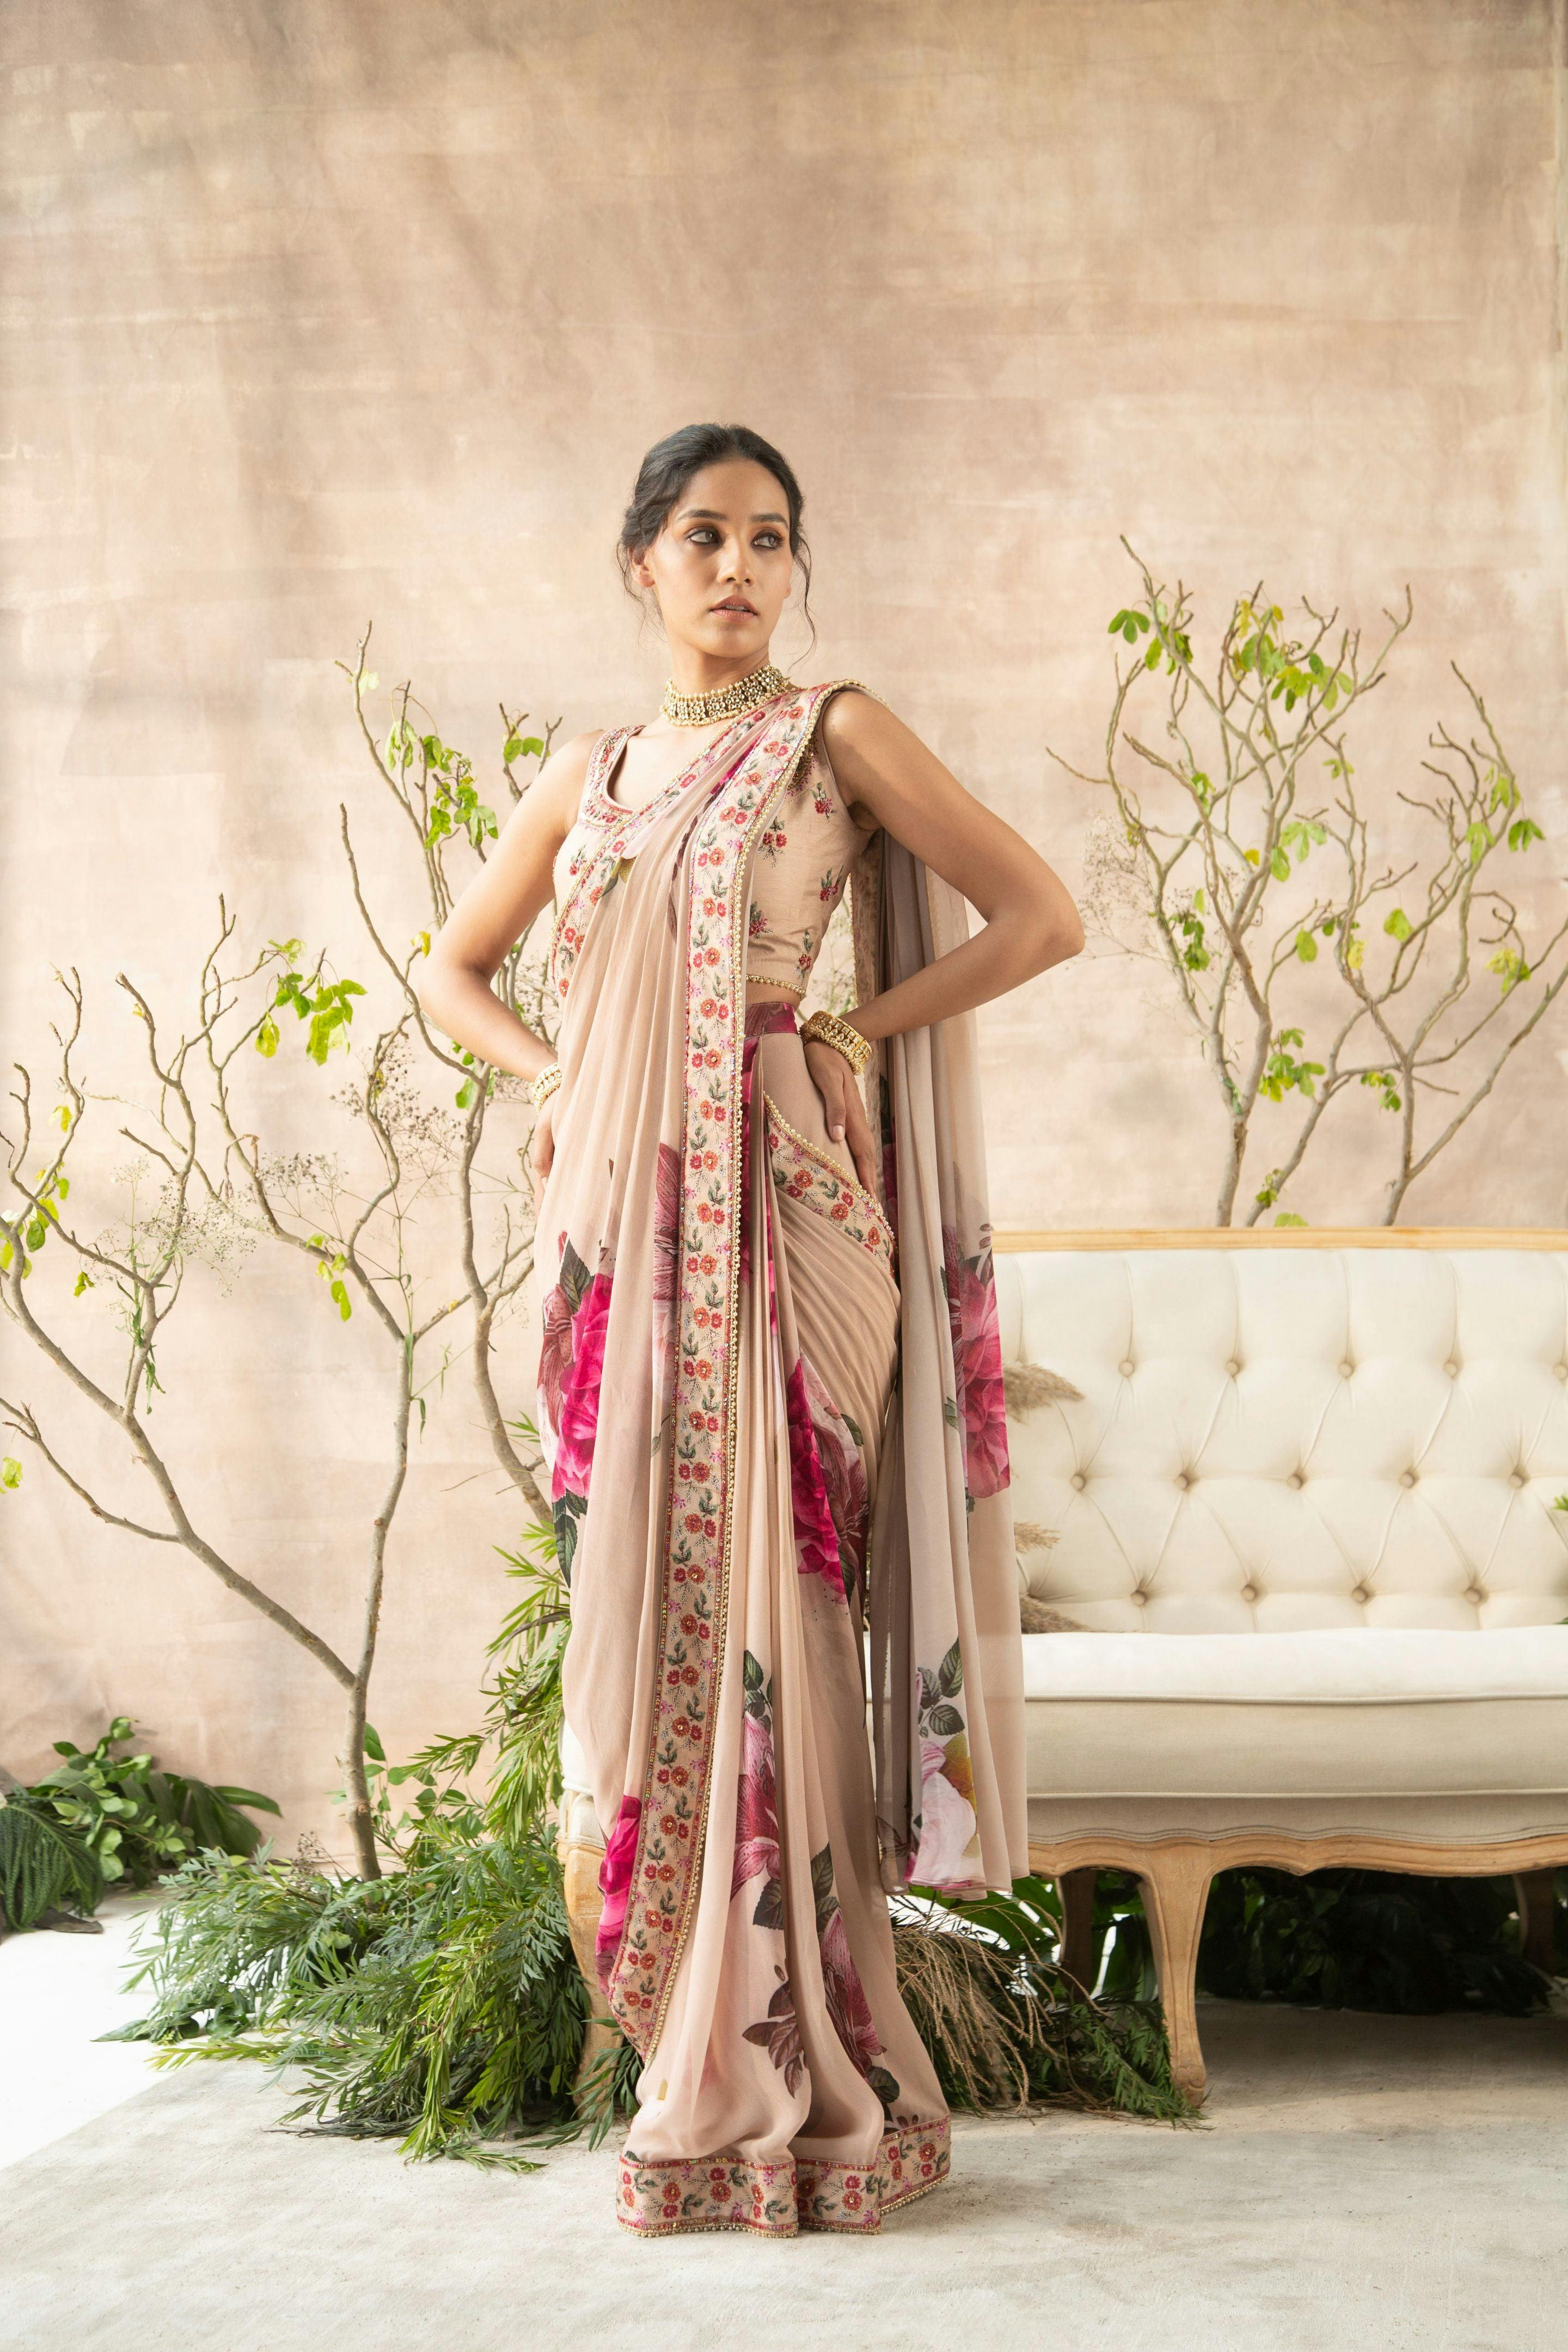 Lavanya handrafted Saree, a product by Kalista